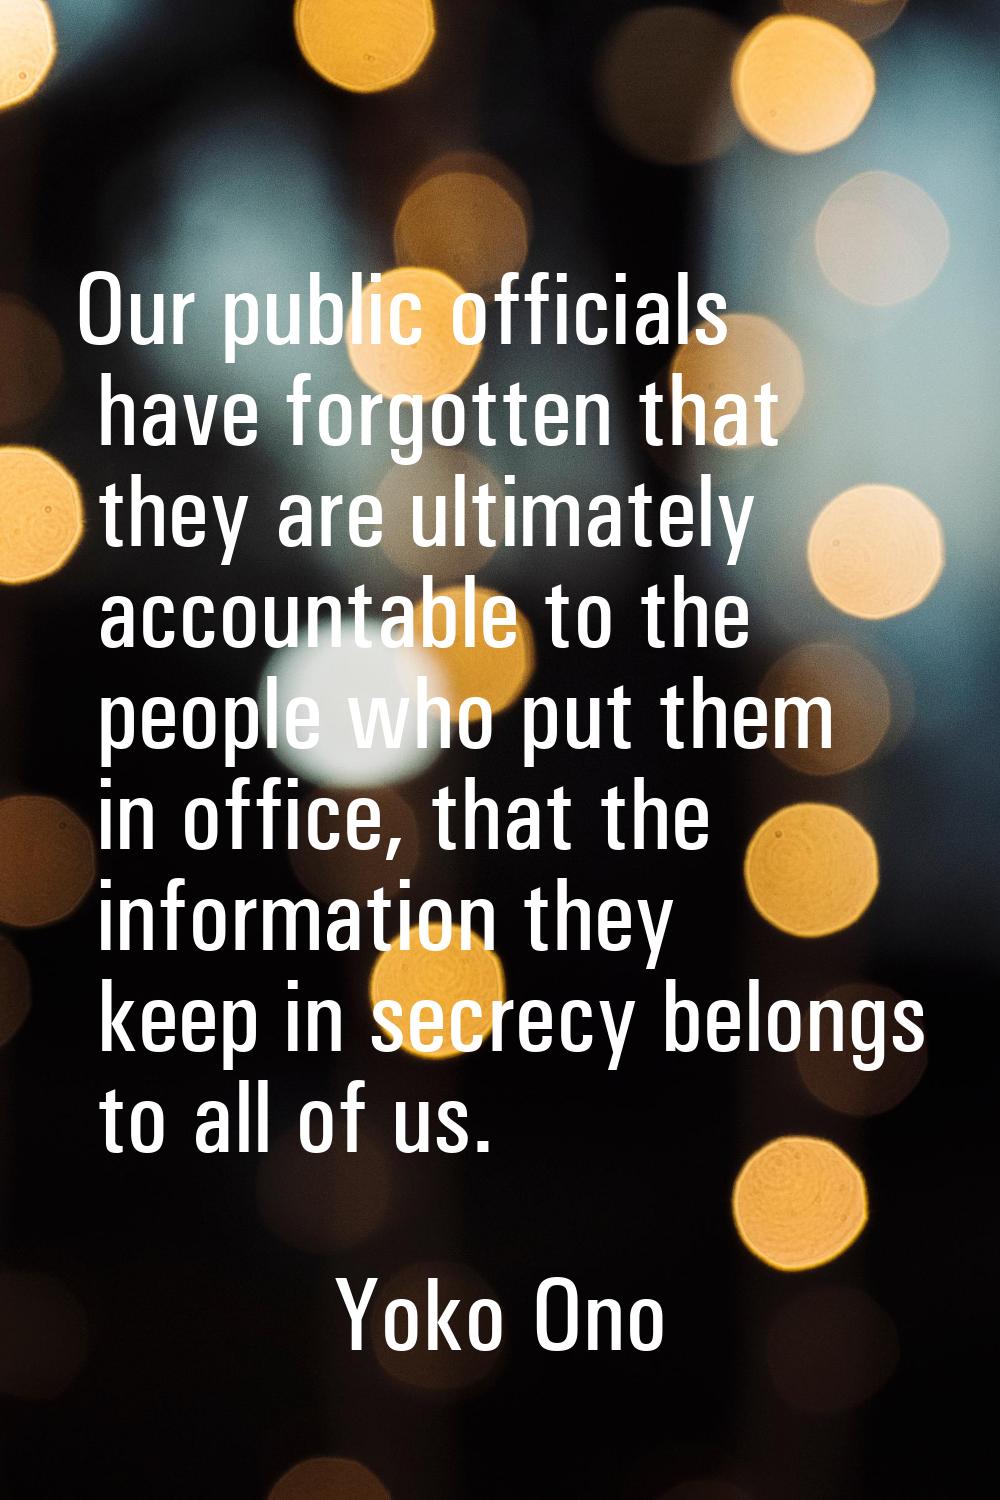 Our public officials have forgotten that they are ultimately accountable to the people who put them